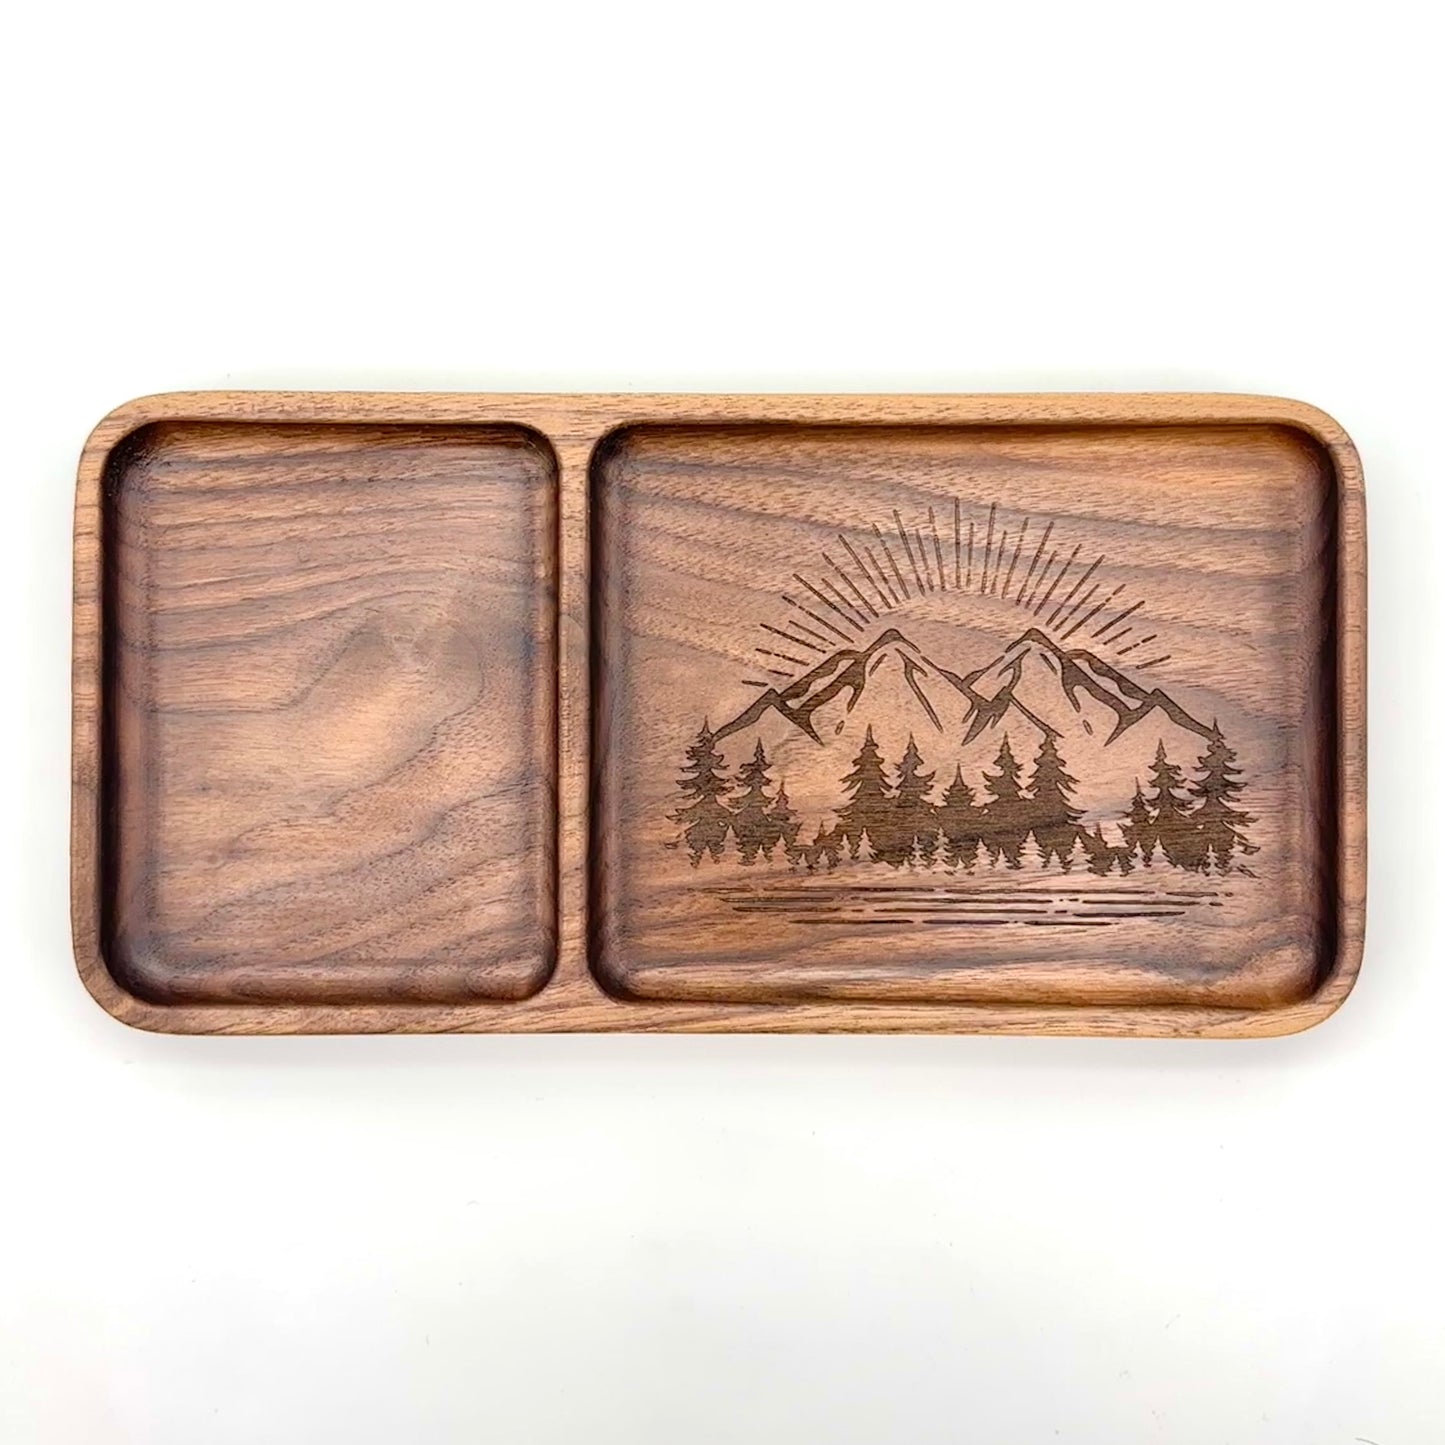 Valet Tray (Large) | Walnut/Cherry Wood | Handcrafted, Laser Etched Design | 5x10